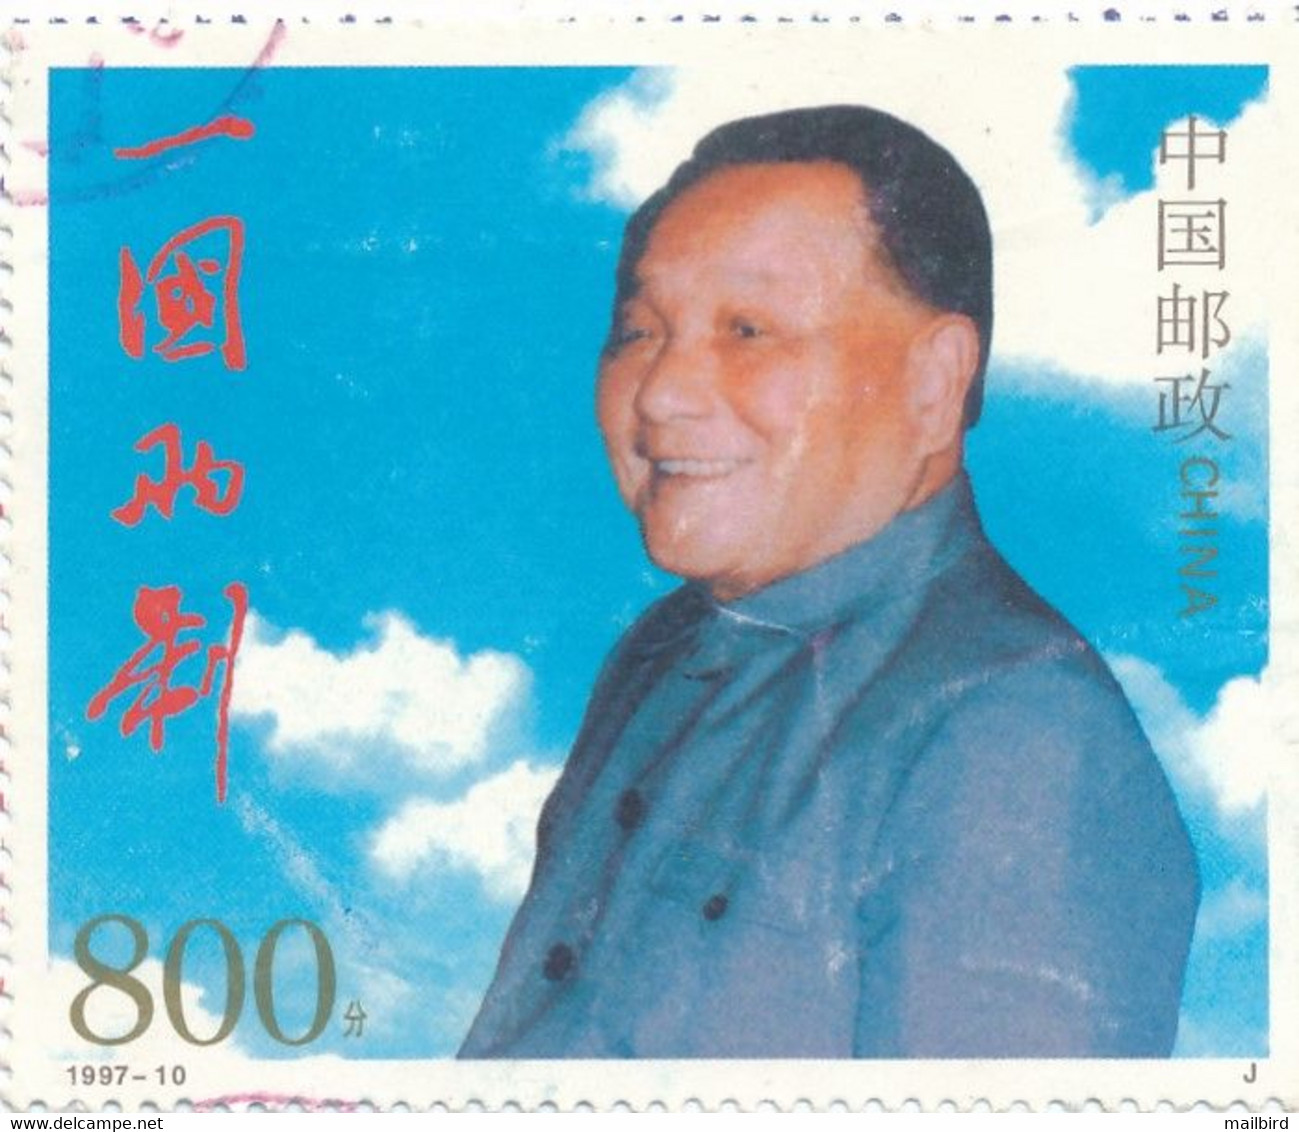 China Peoples Republic Scott No. 2774c Used Year 1997-10 Stamp From Souv. Sheet Postally Used. - Oblitérés